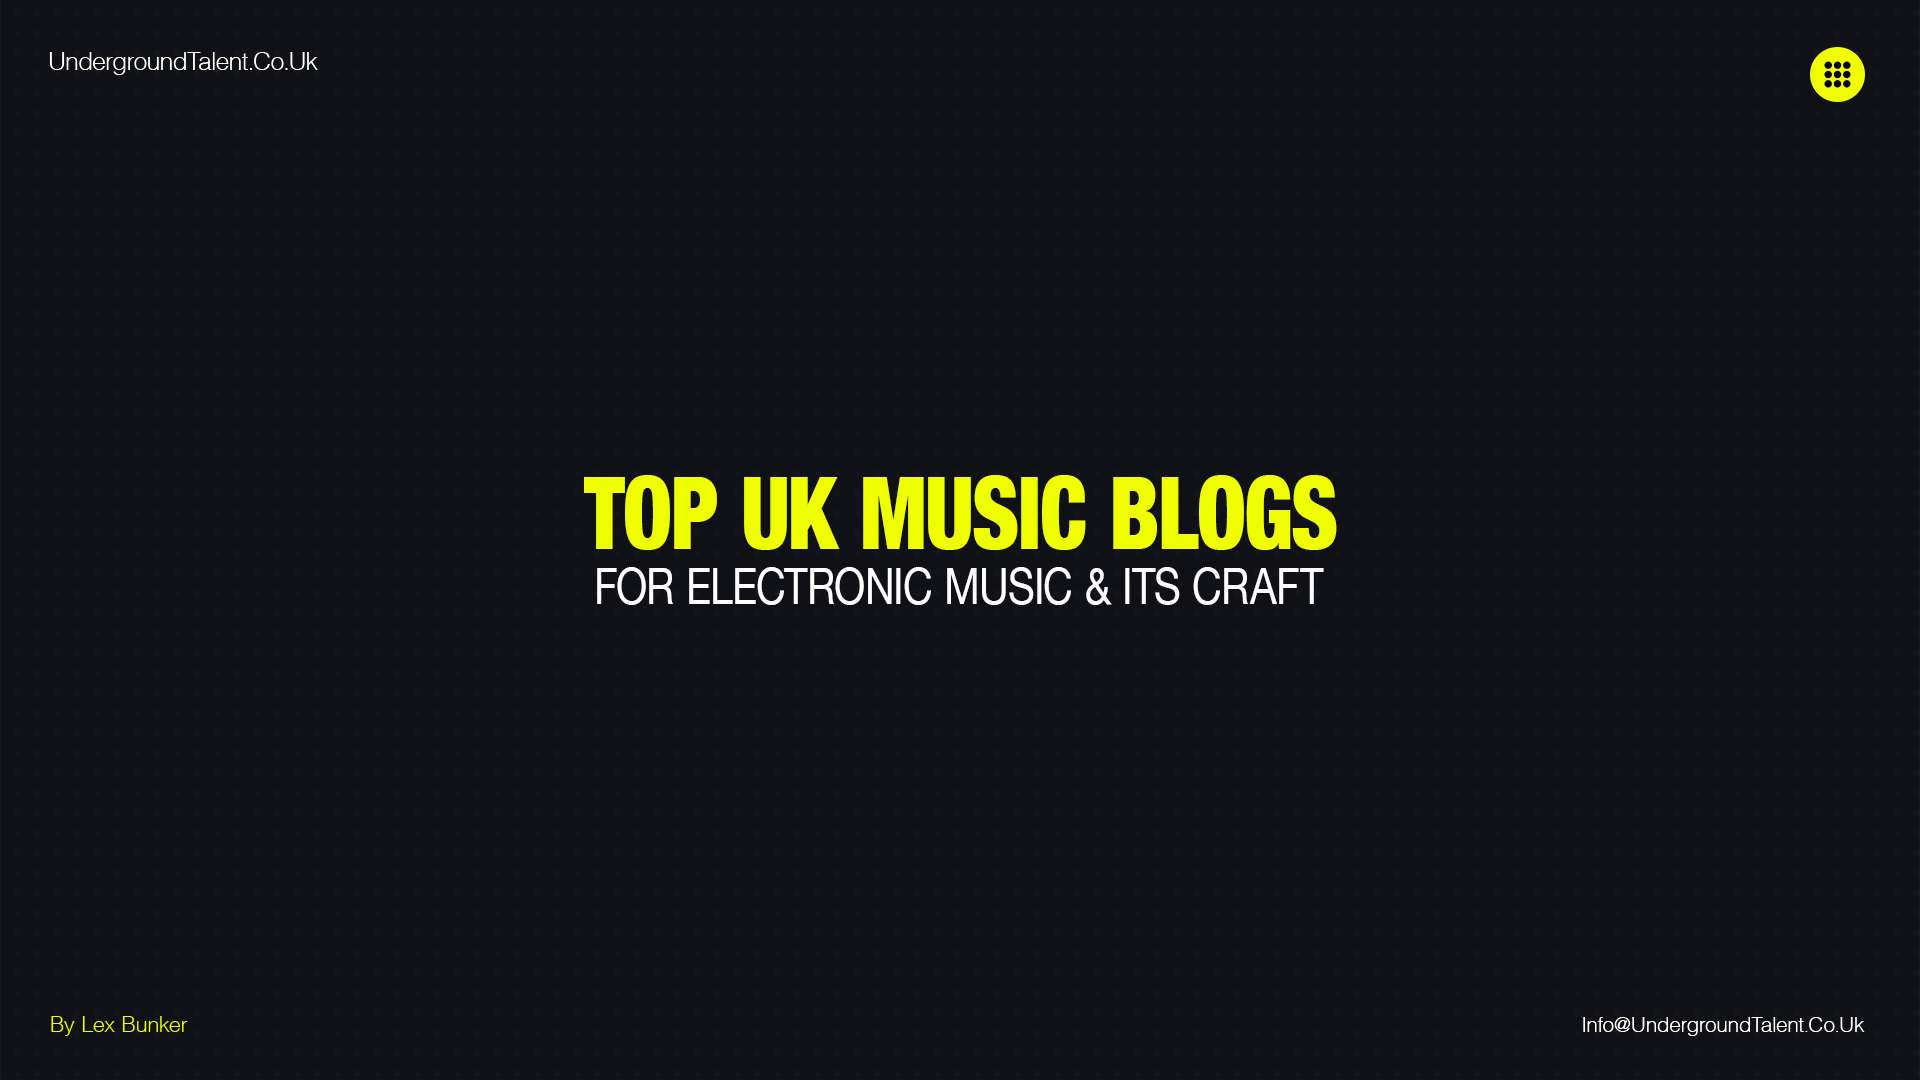 Top UK Music Blogs for Electronic Music & Its Craft